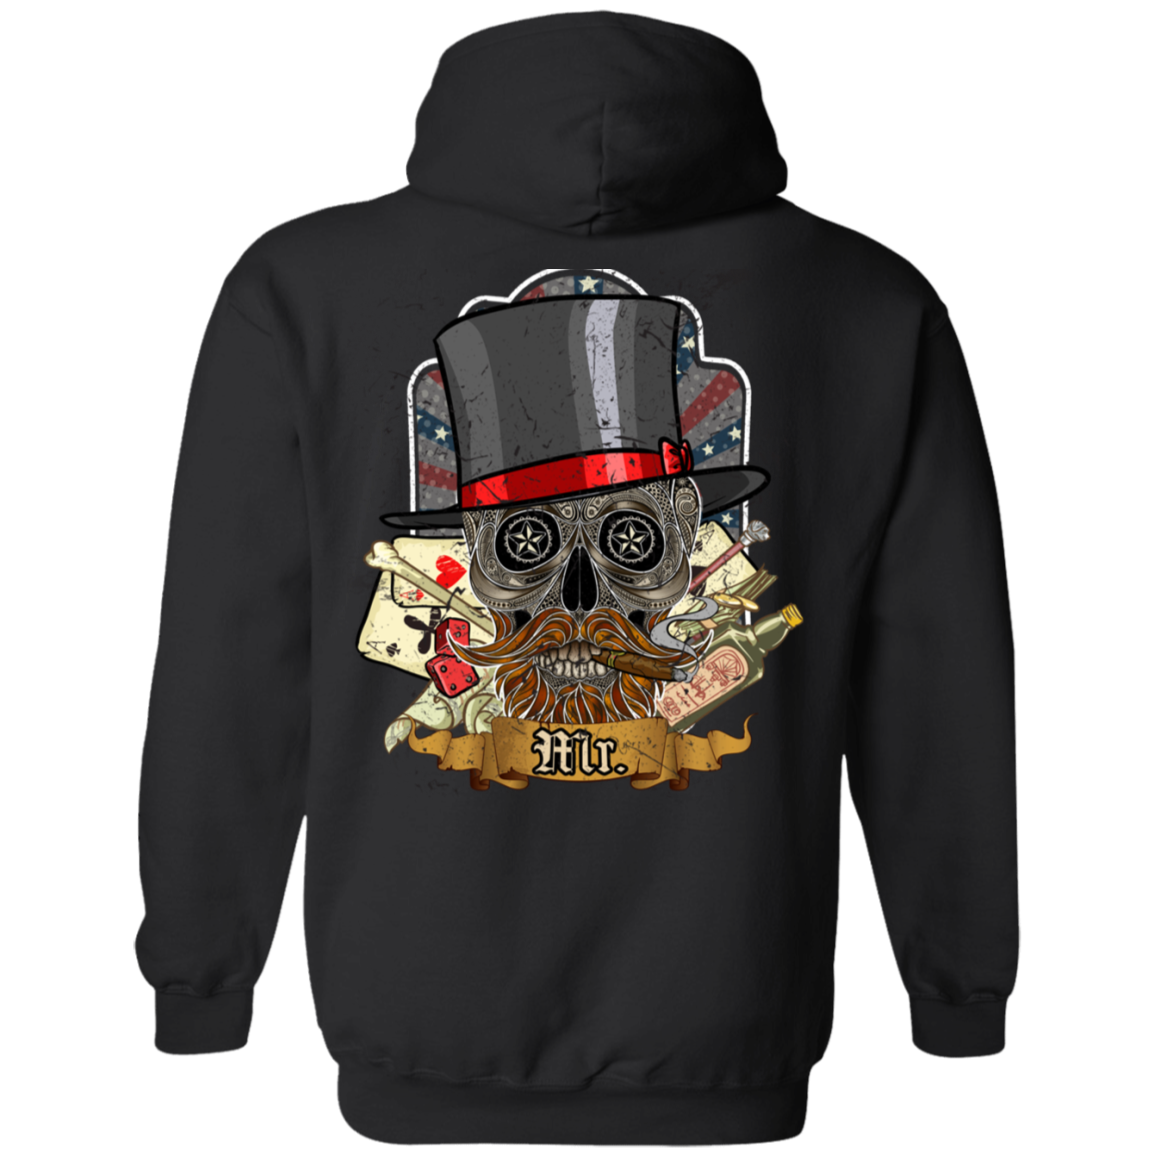 Poker Skull in a Hat Hoodie, Cotton/Polyester, Black